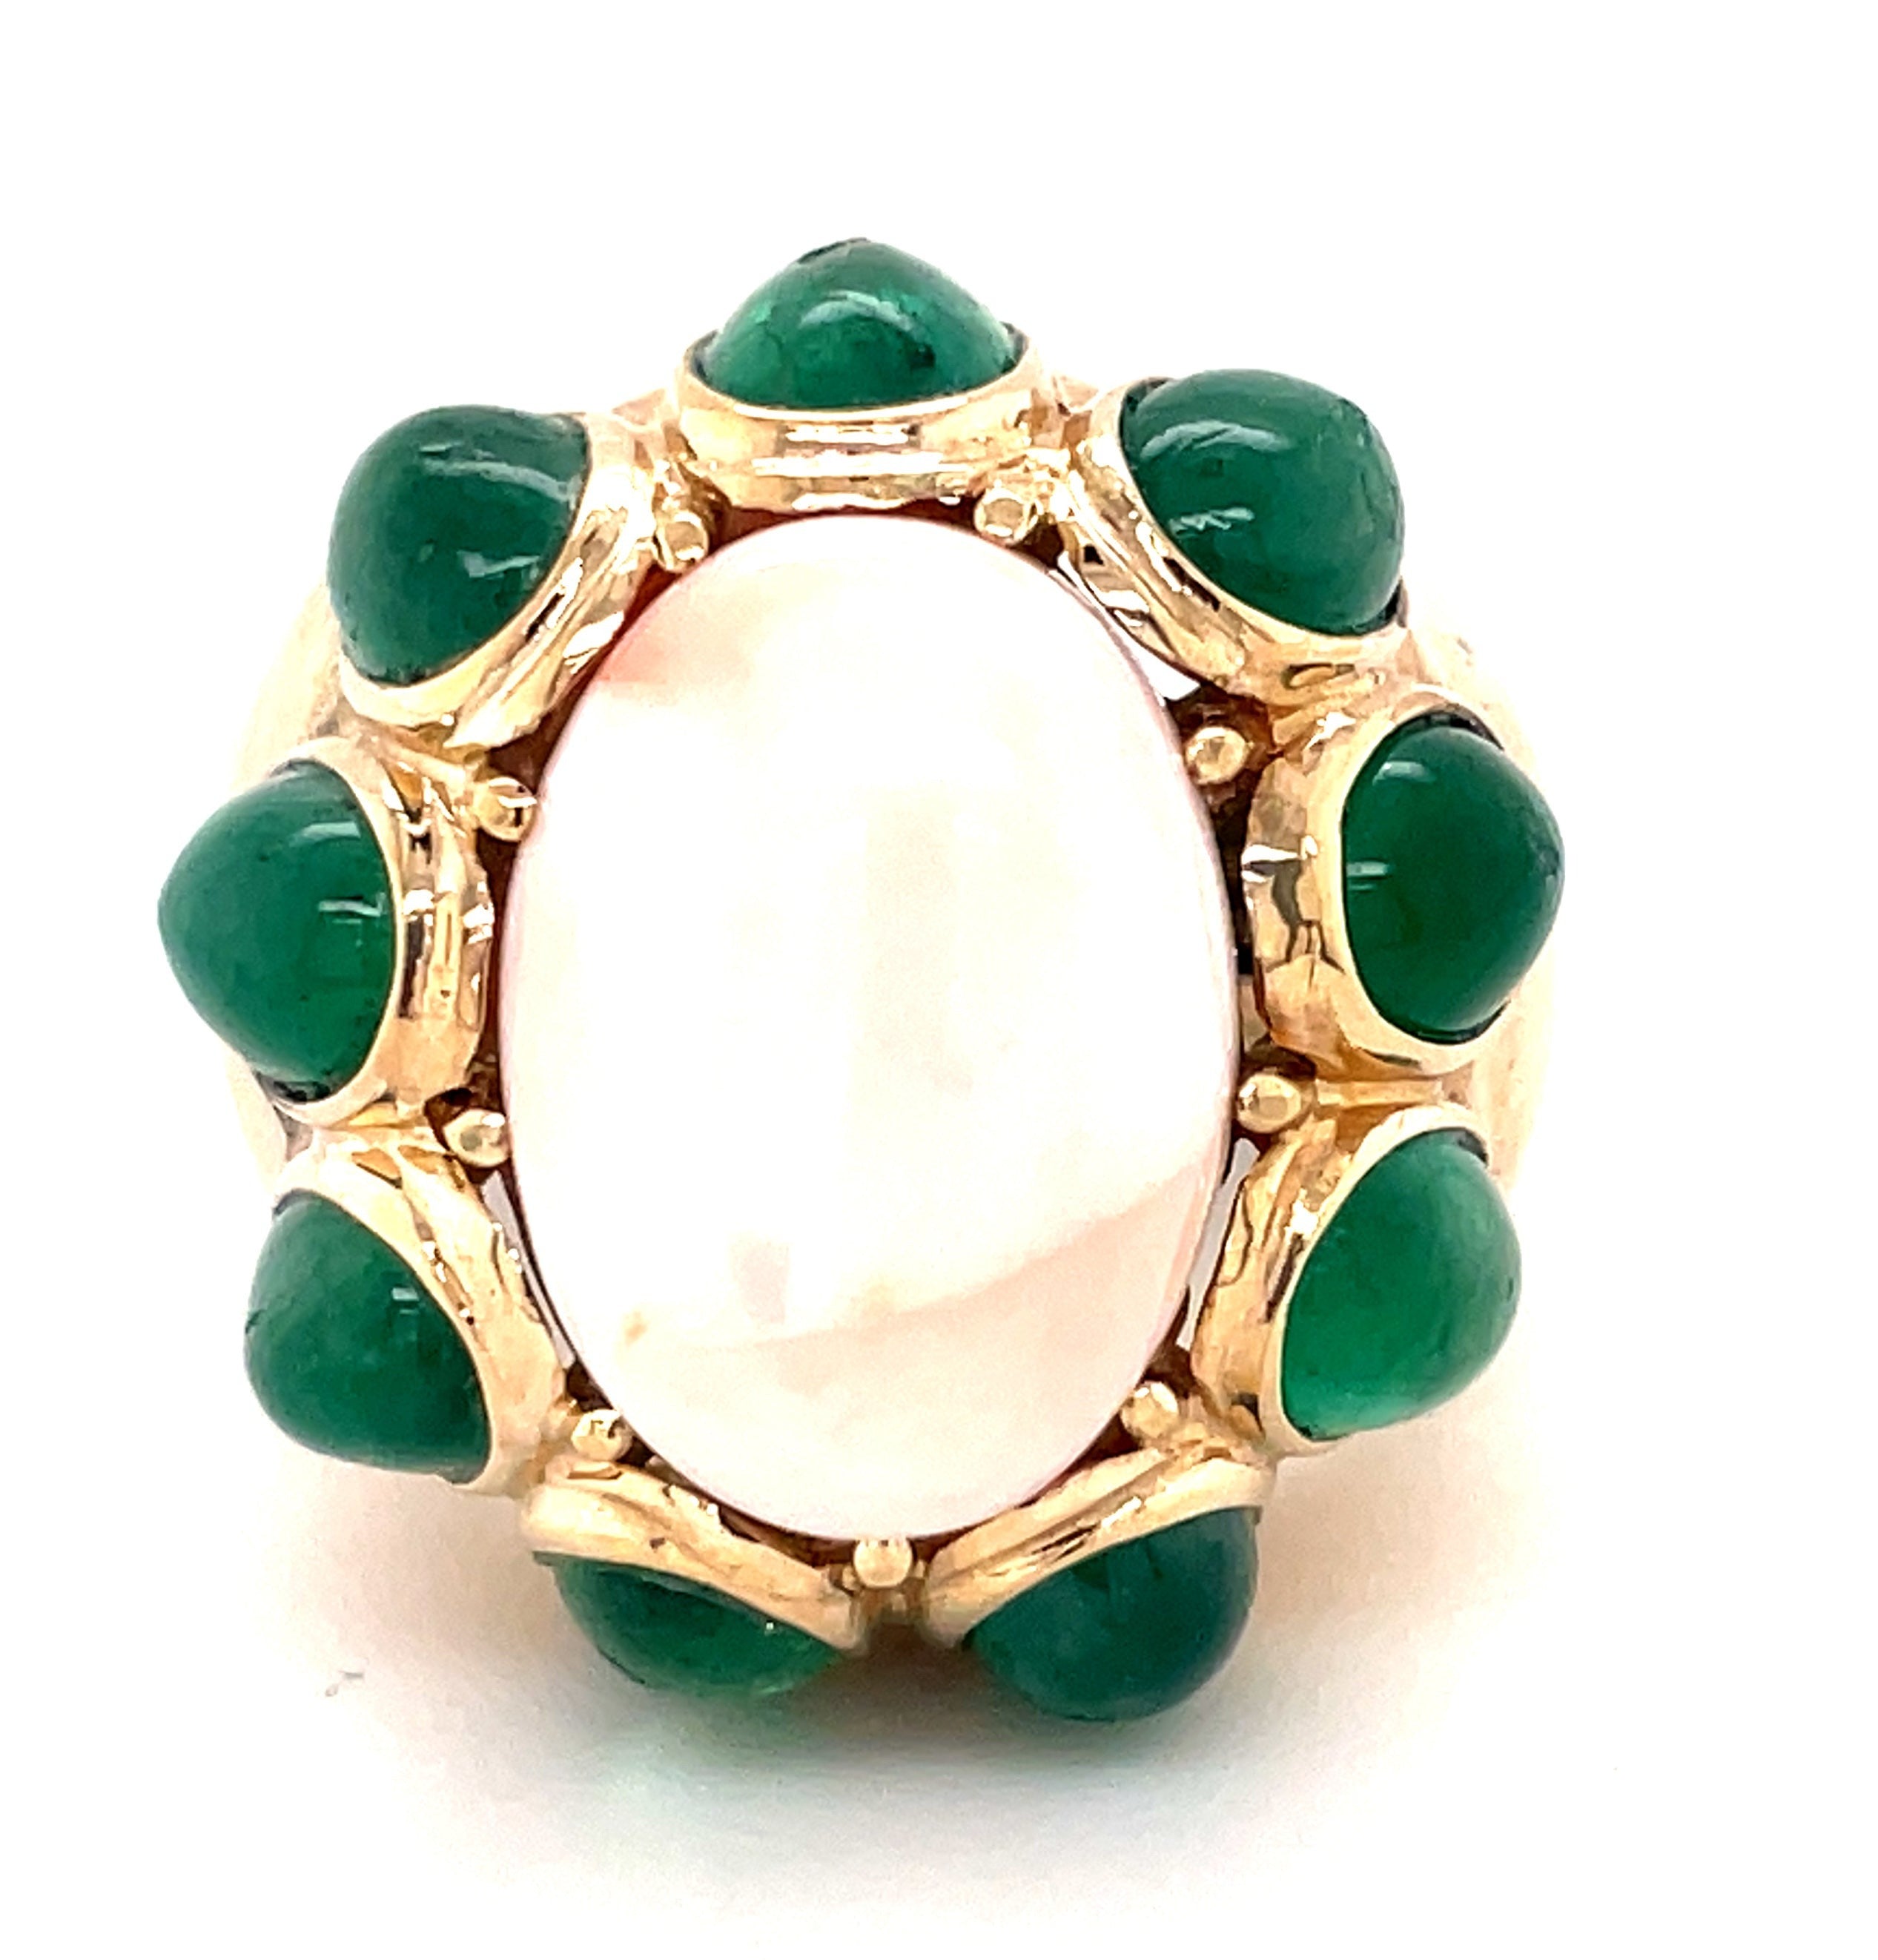 This 14k yellow gold antique ring is a stunning example of estate jewelry, with an angel skin coral cabochon measuring 23.00 mm surrounded by nine large emerald cabochons. Its great condition will make it a timeless piece you can treasure for years to come.